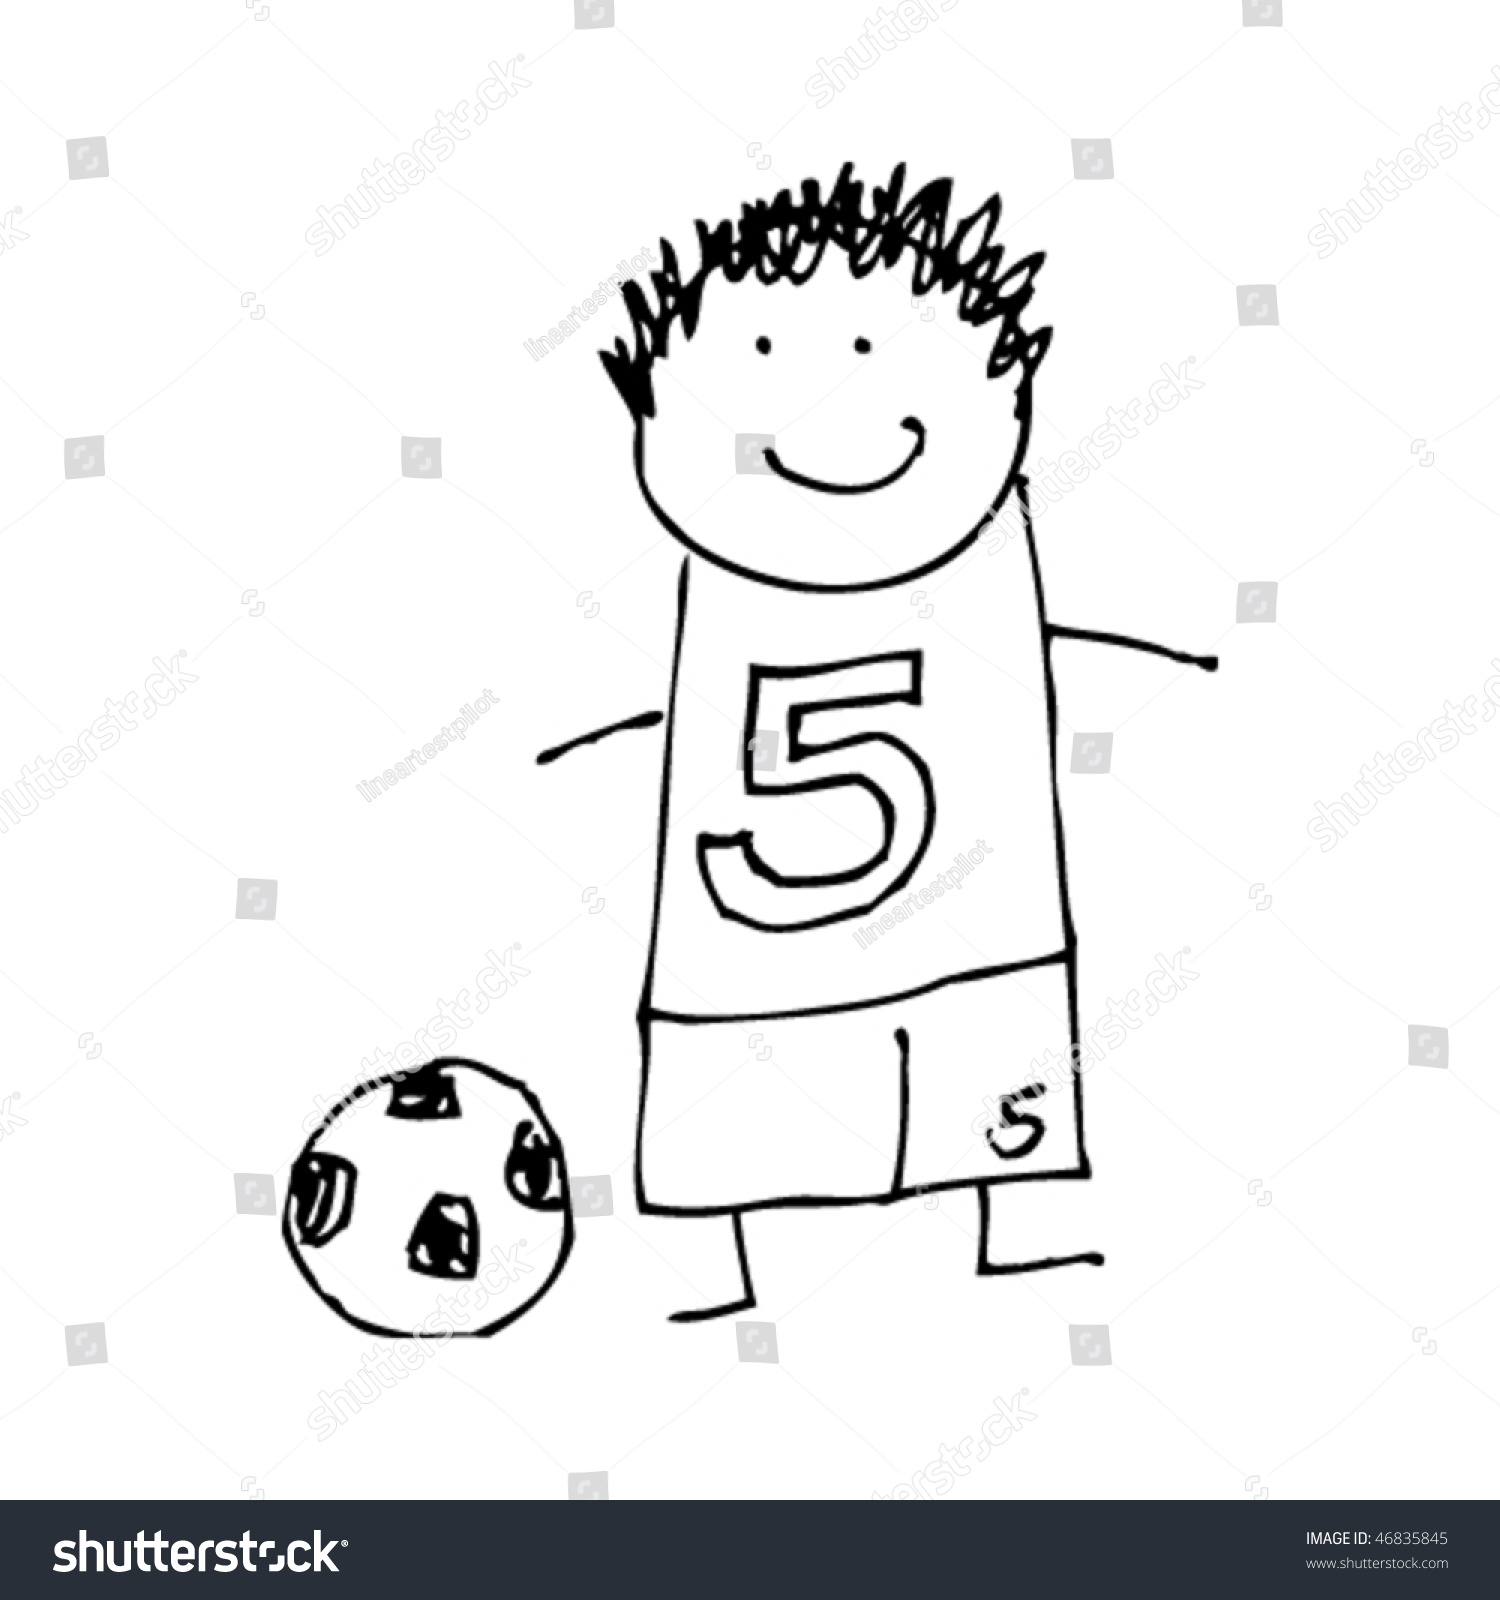 stock-vector-child-s-drawing-of-a-boy-playing-soccer-46835845.jpg